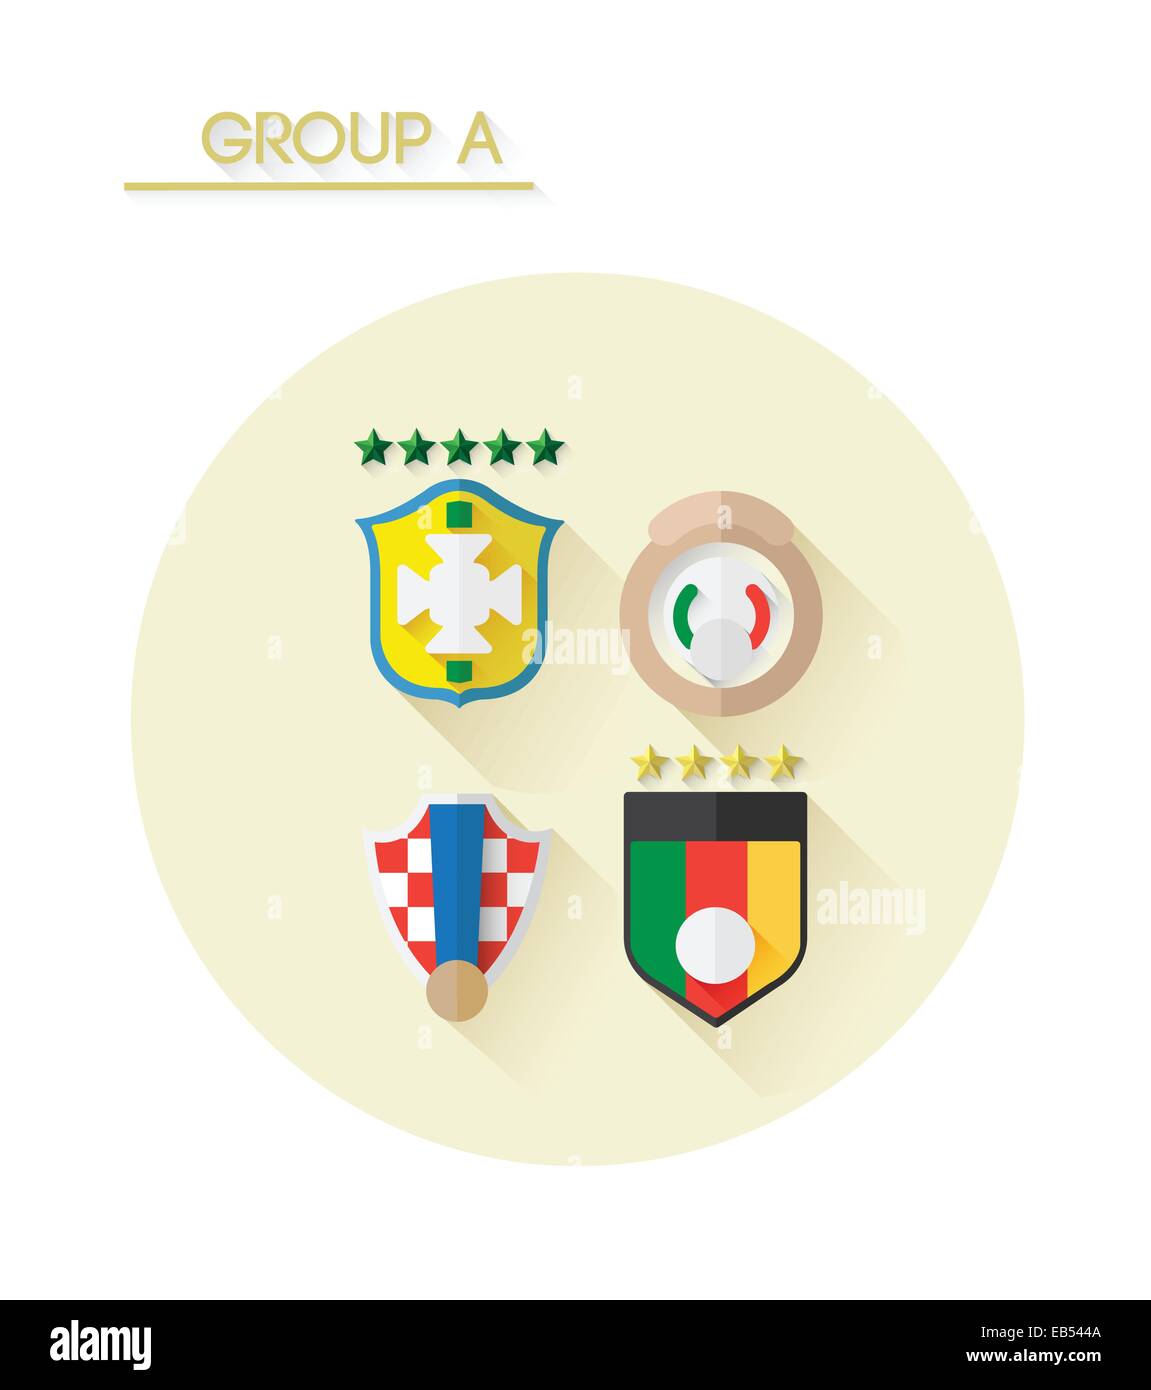 Group a with country crests Stock Vector